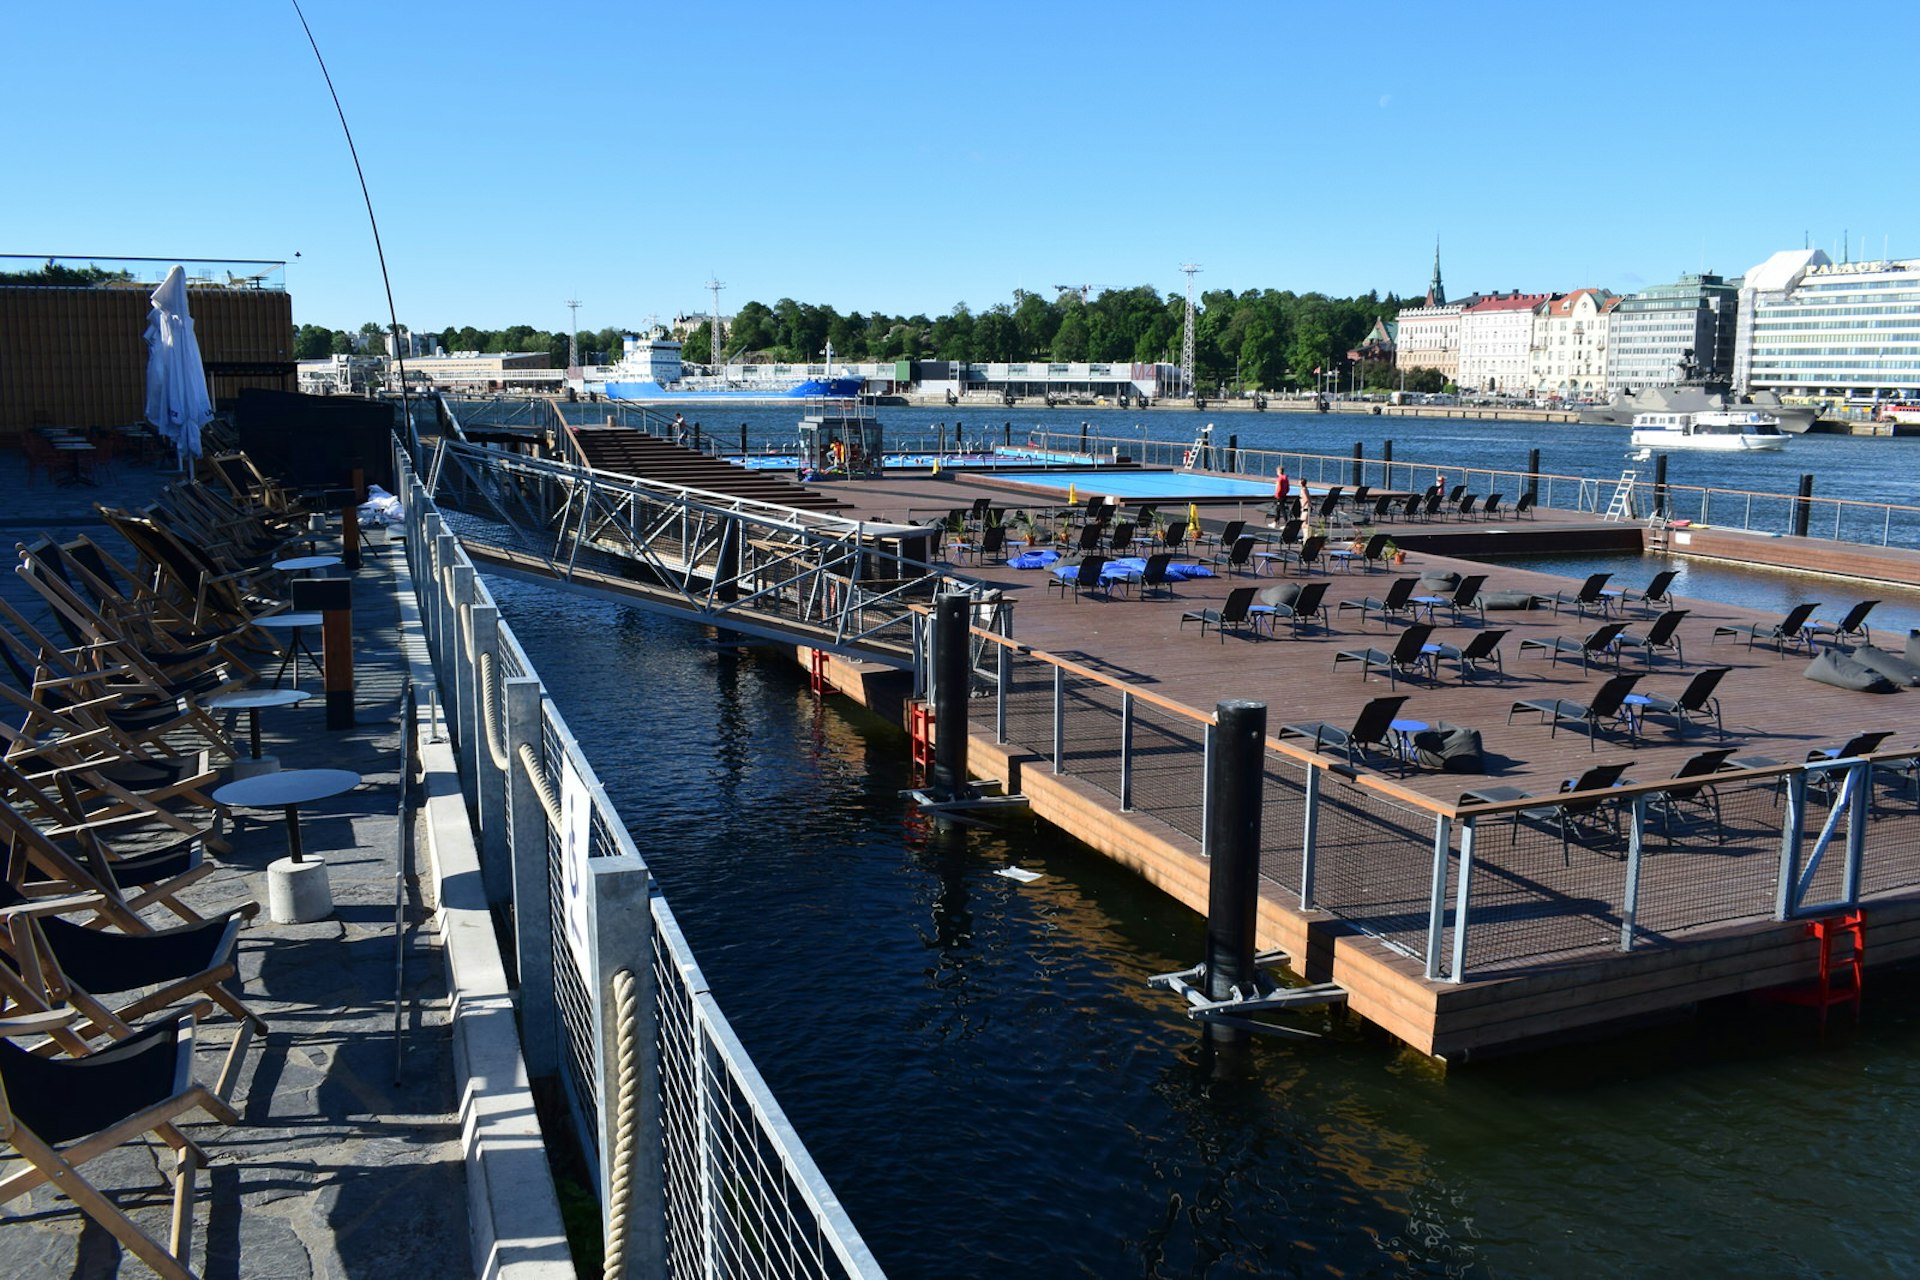 A floating deck with outdoor pools and loungers at Allas Sea Pools in Helsinki © Violetta Teetor / Lonely Planet